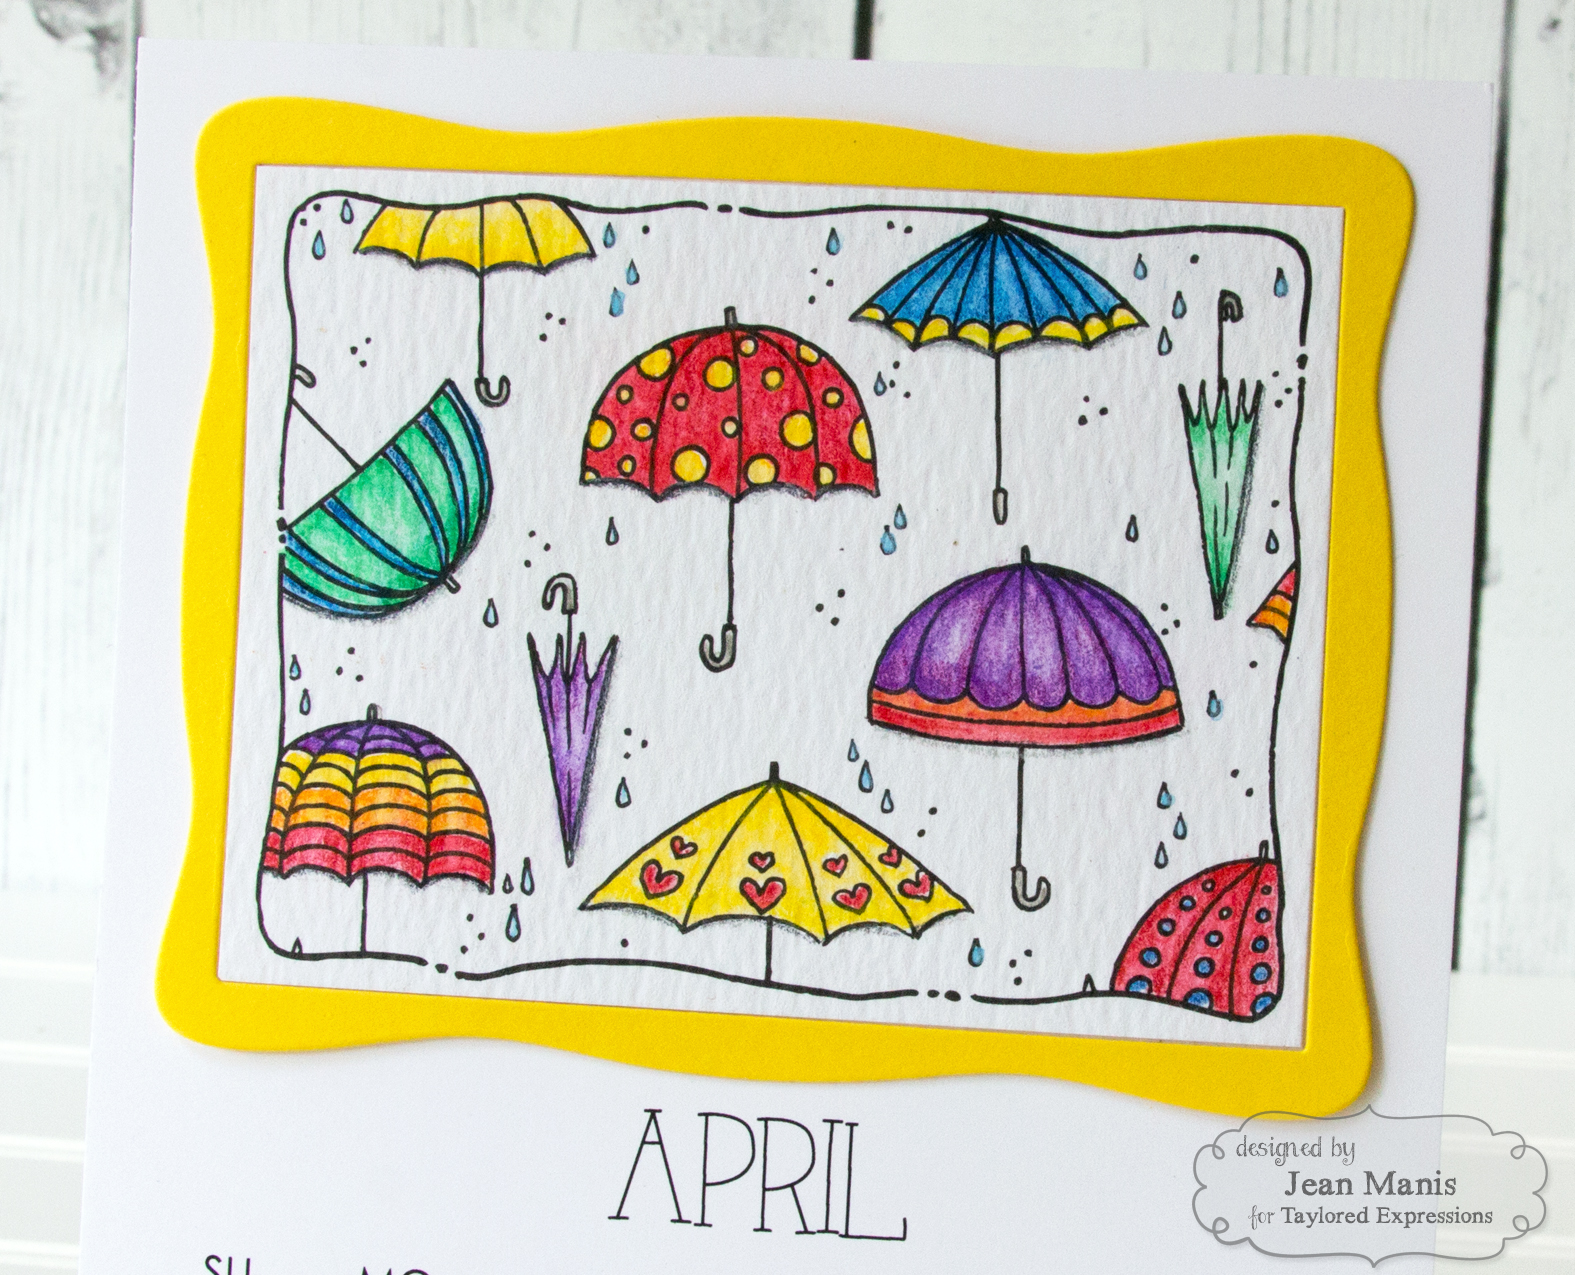 Taylored Expressions April Watercolored Calendar Right as Rain